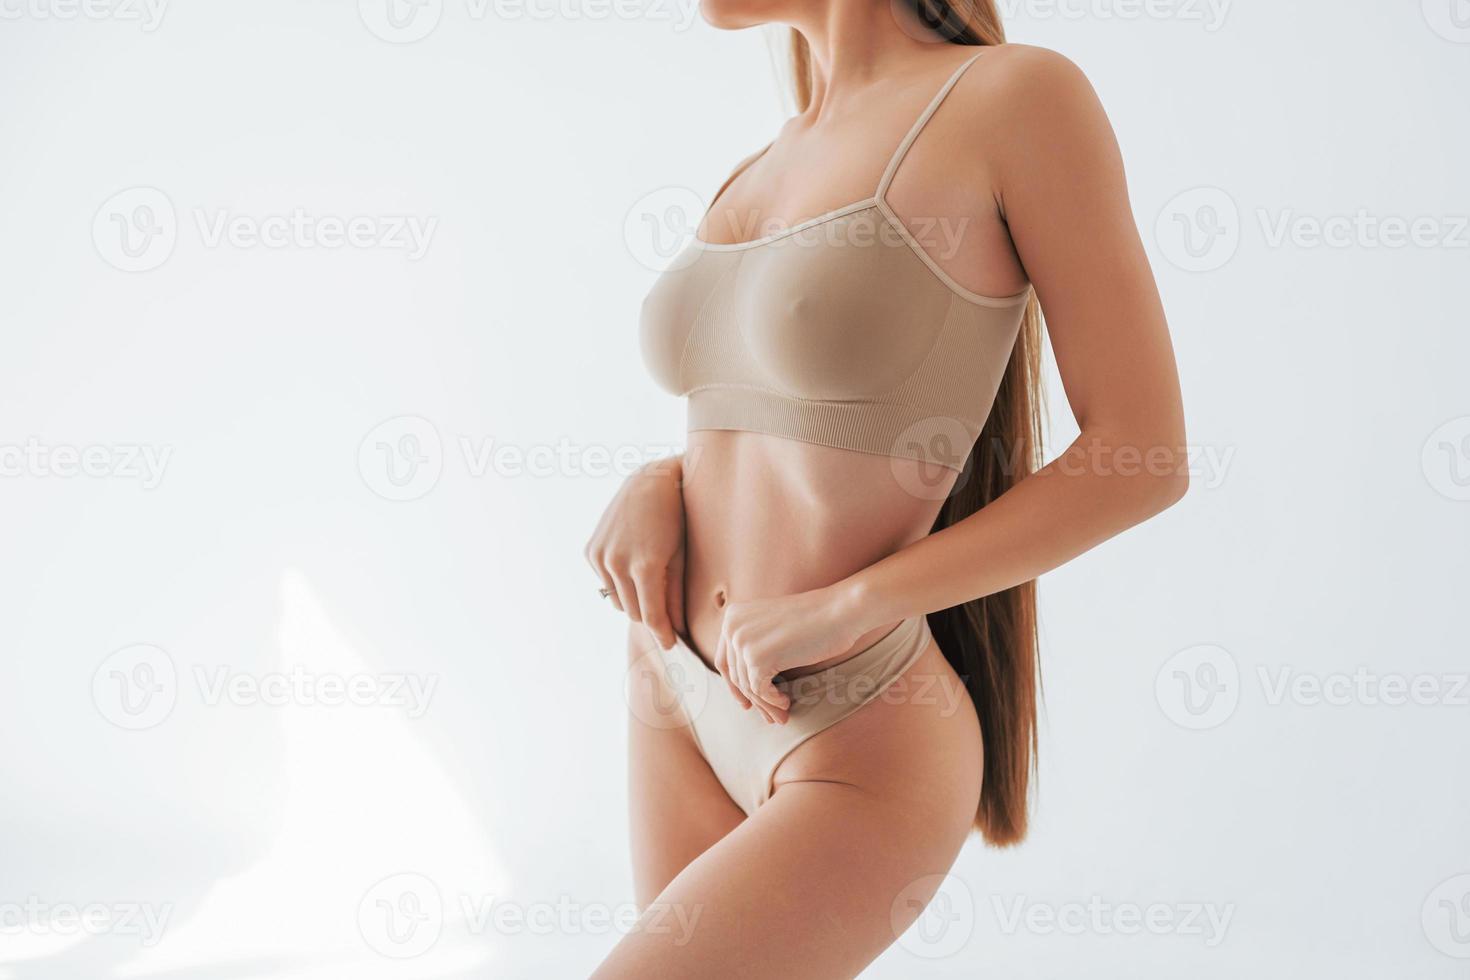 Showing new lingerie. Woman in underwear with slim body type is